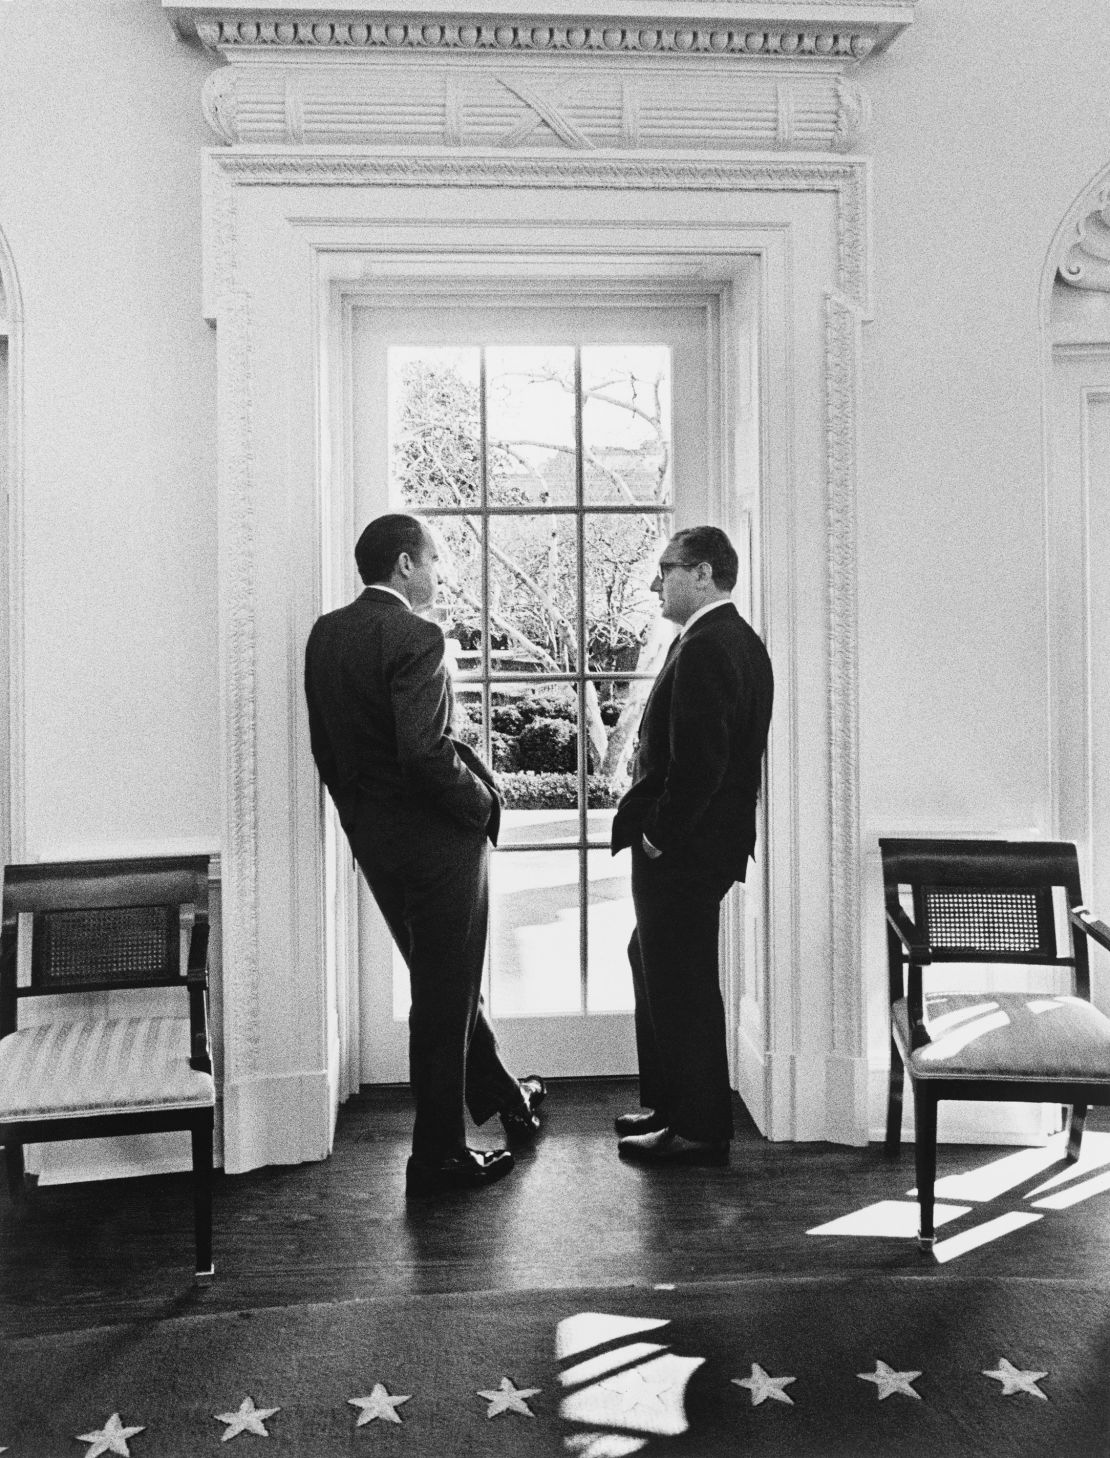 President Richard Nixon and Henry Kissinger stand at an Oval Office window on February 10, 1971.